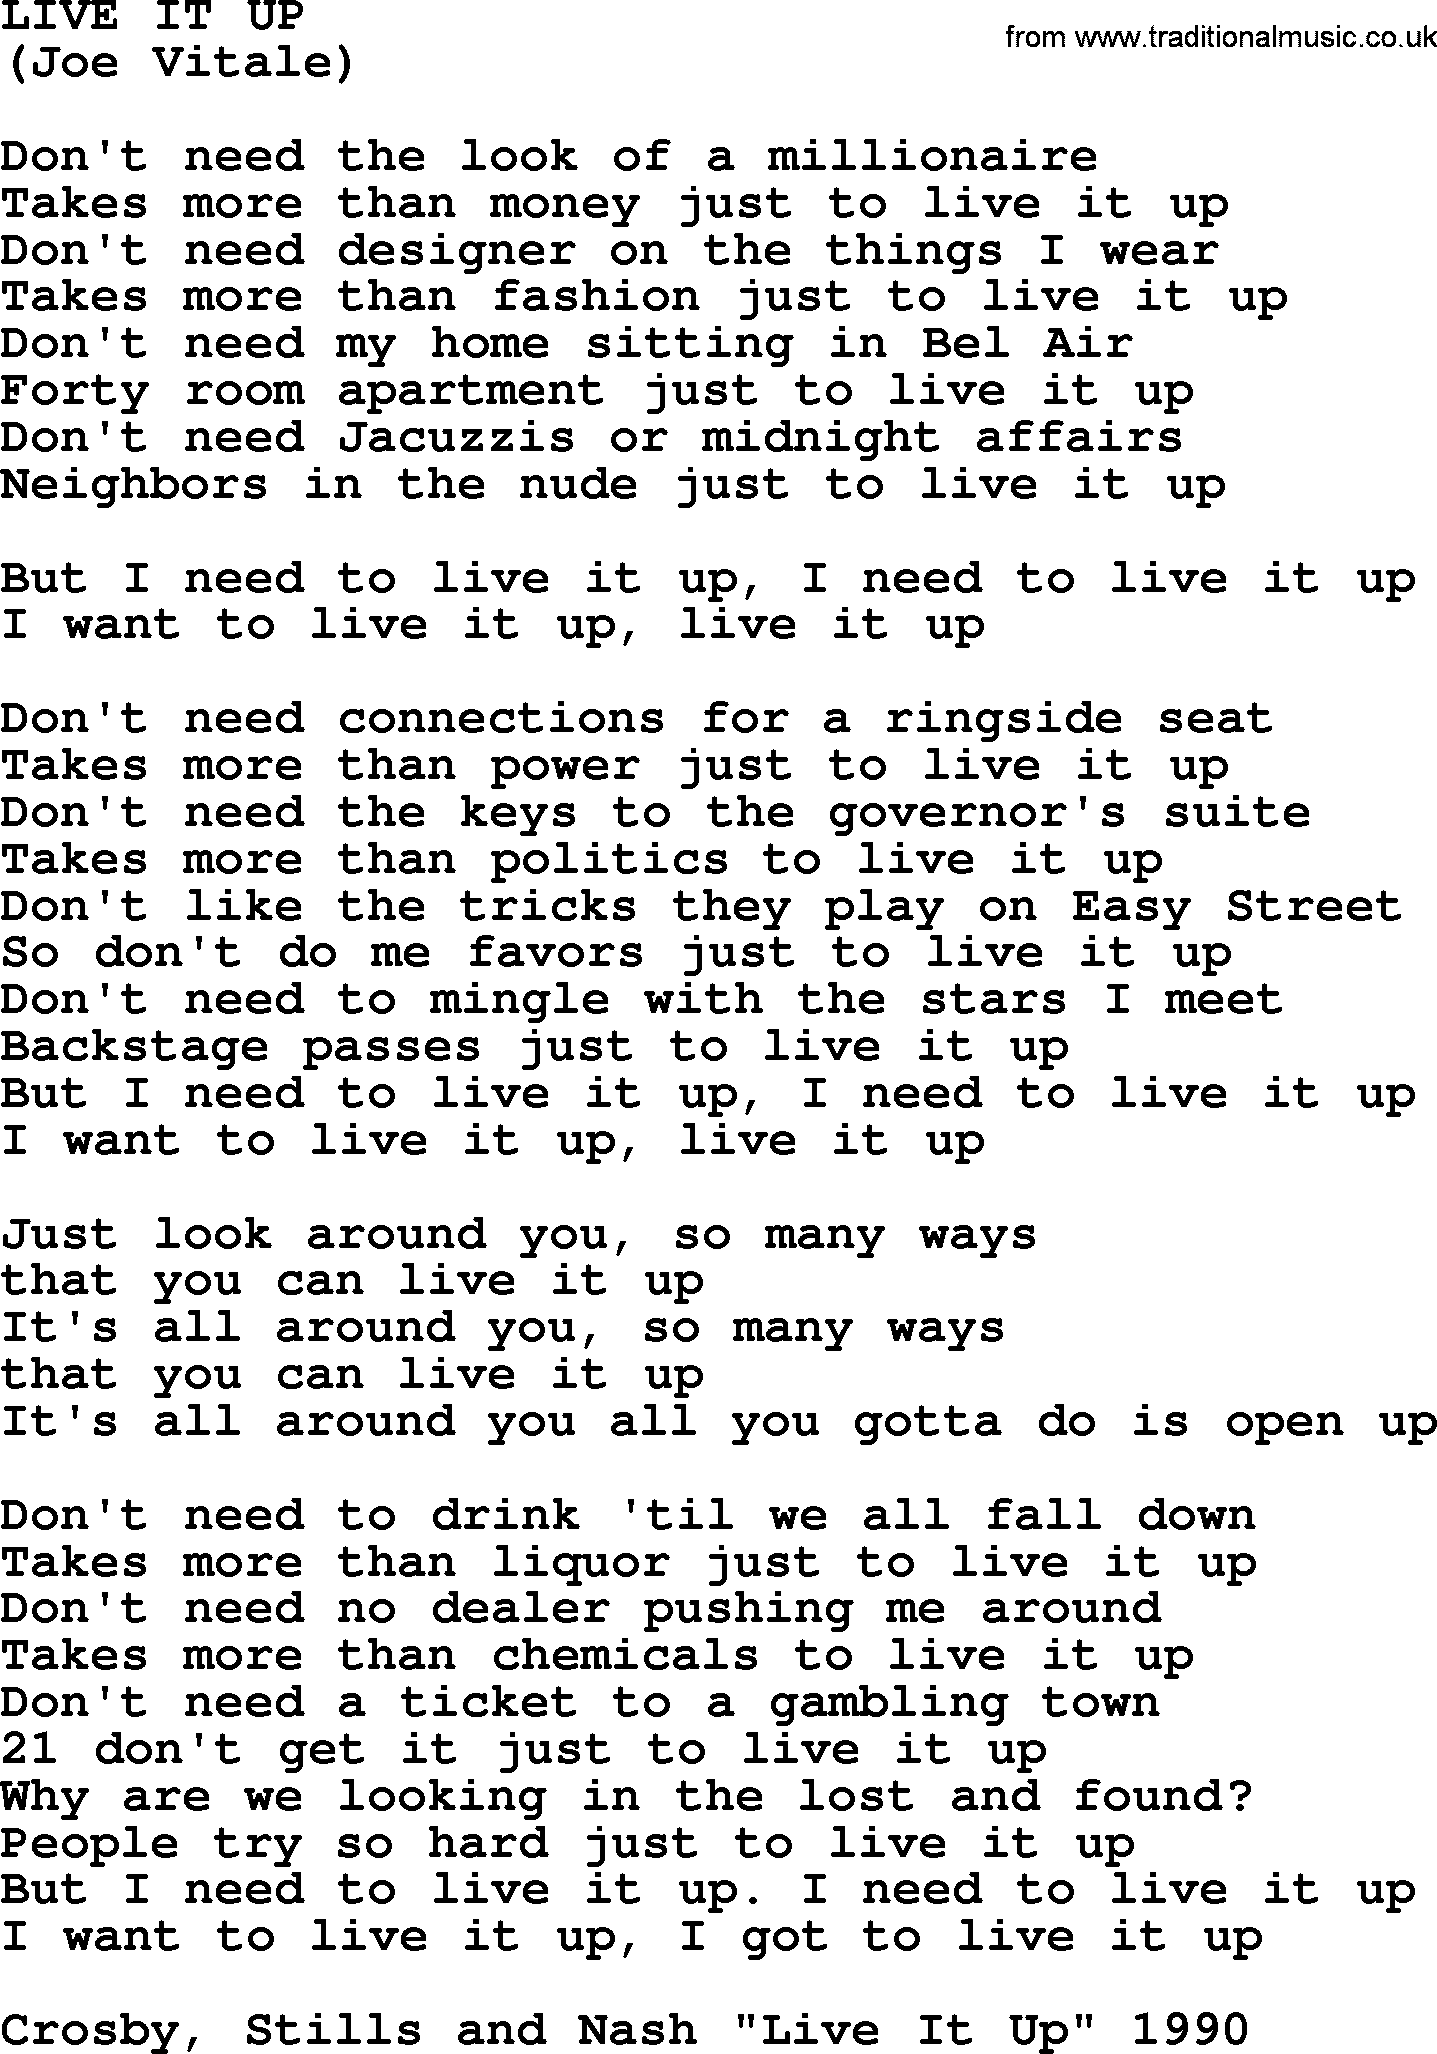 The Byrds song Live It Up, lyrics